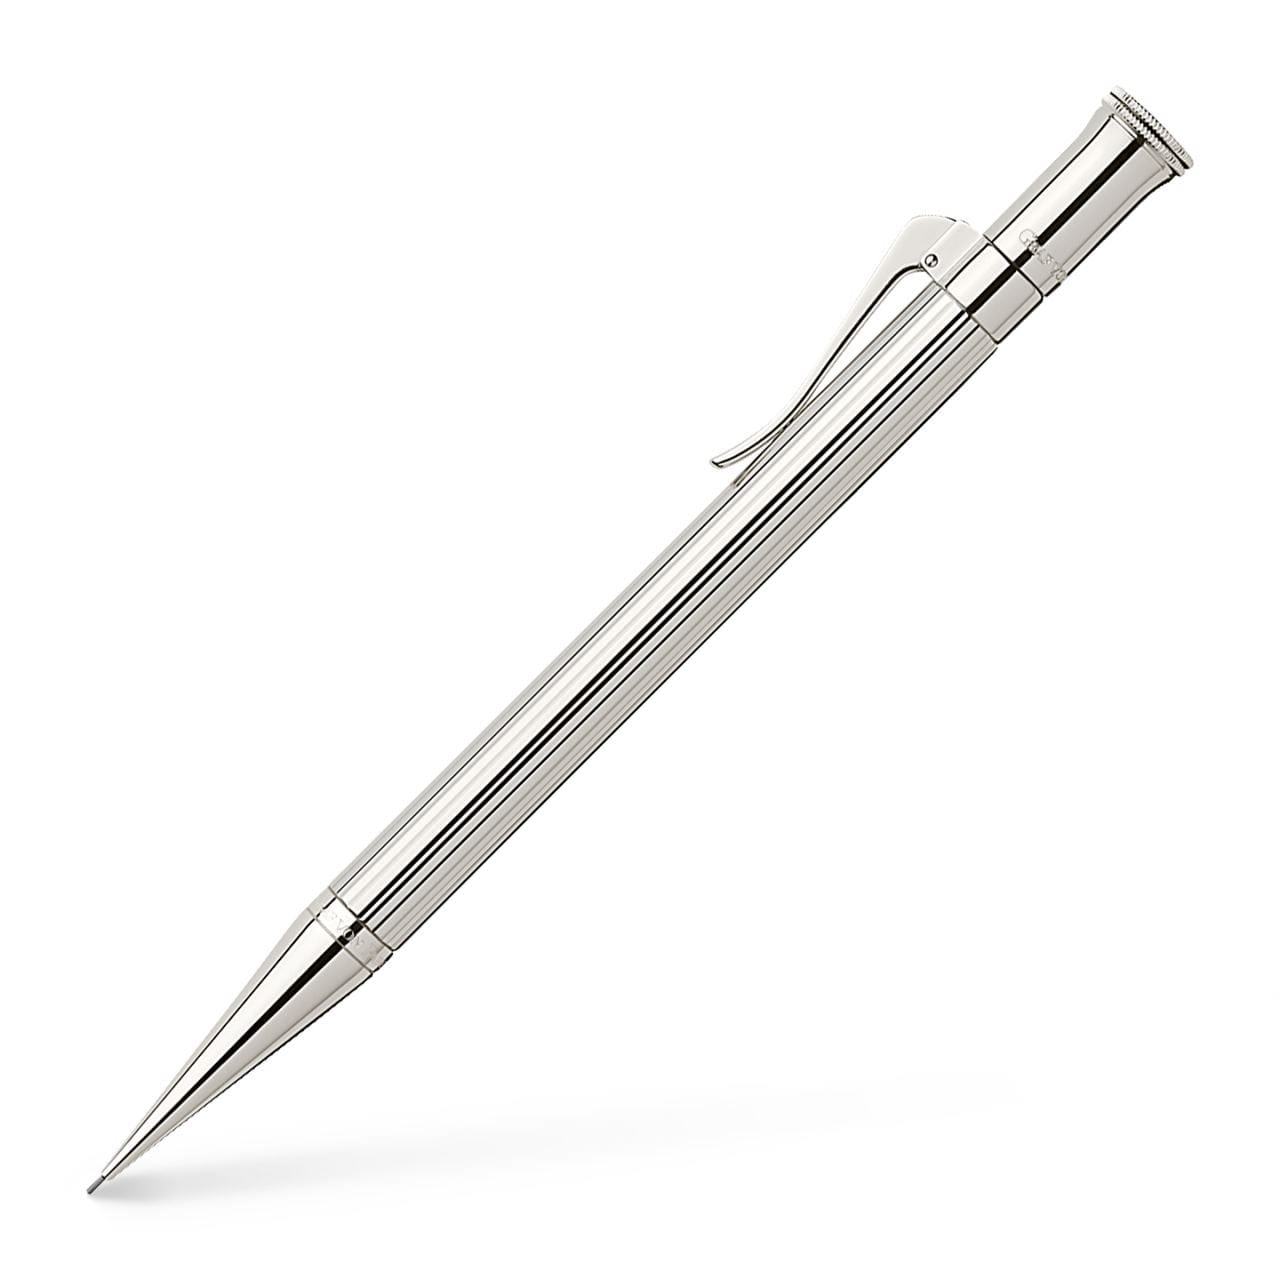 Graf-von-Faber-Castell - Propelling Pencil Classic sterling silver